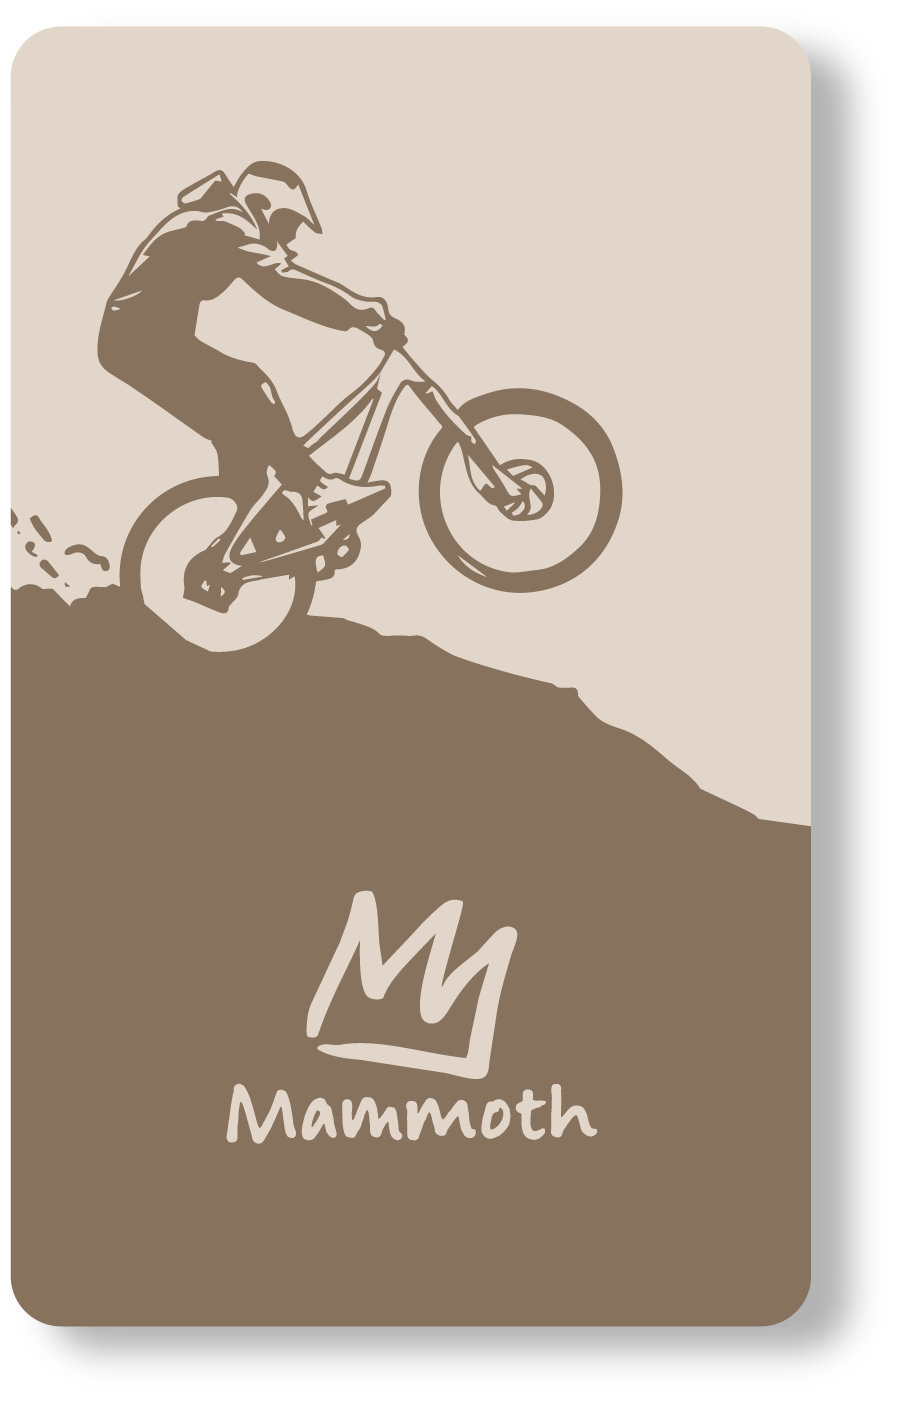 Image of a bike park pass with the Mammoth Logo